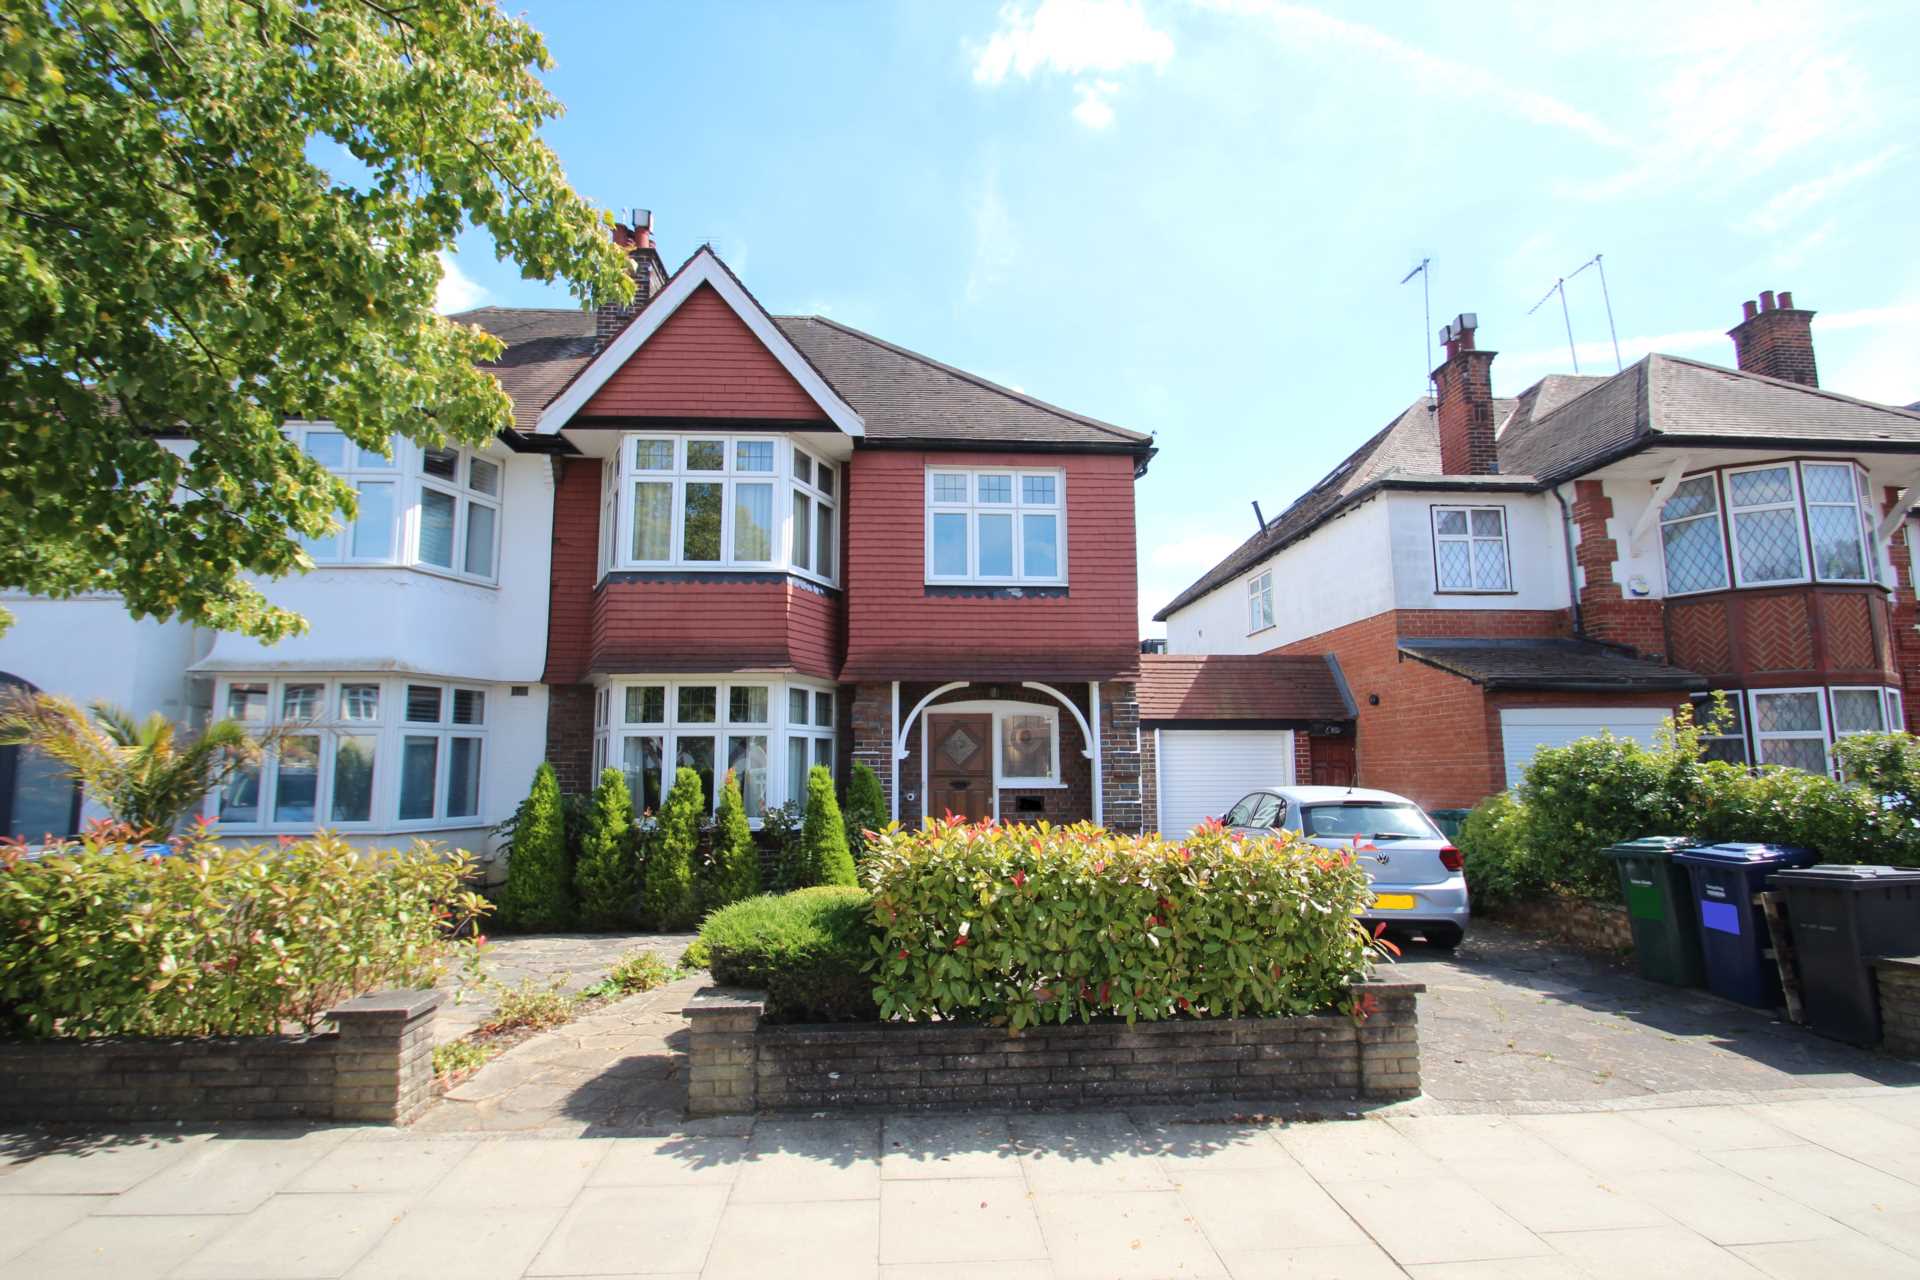 Creighton Avenue, East Finchley, N2, Image 1